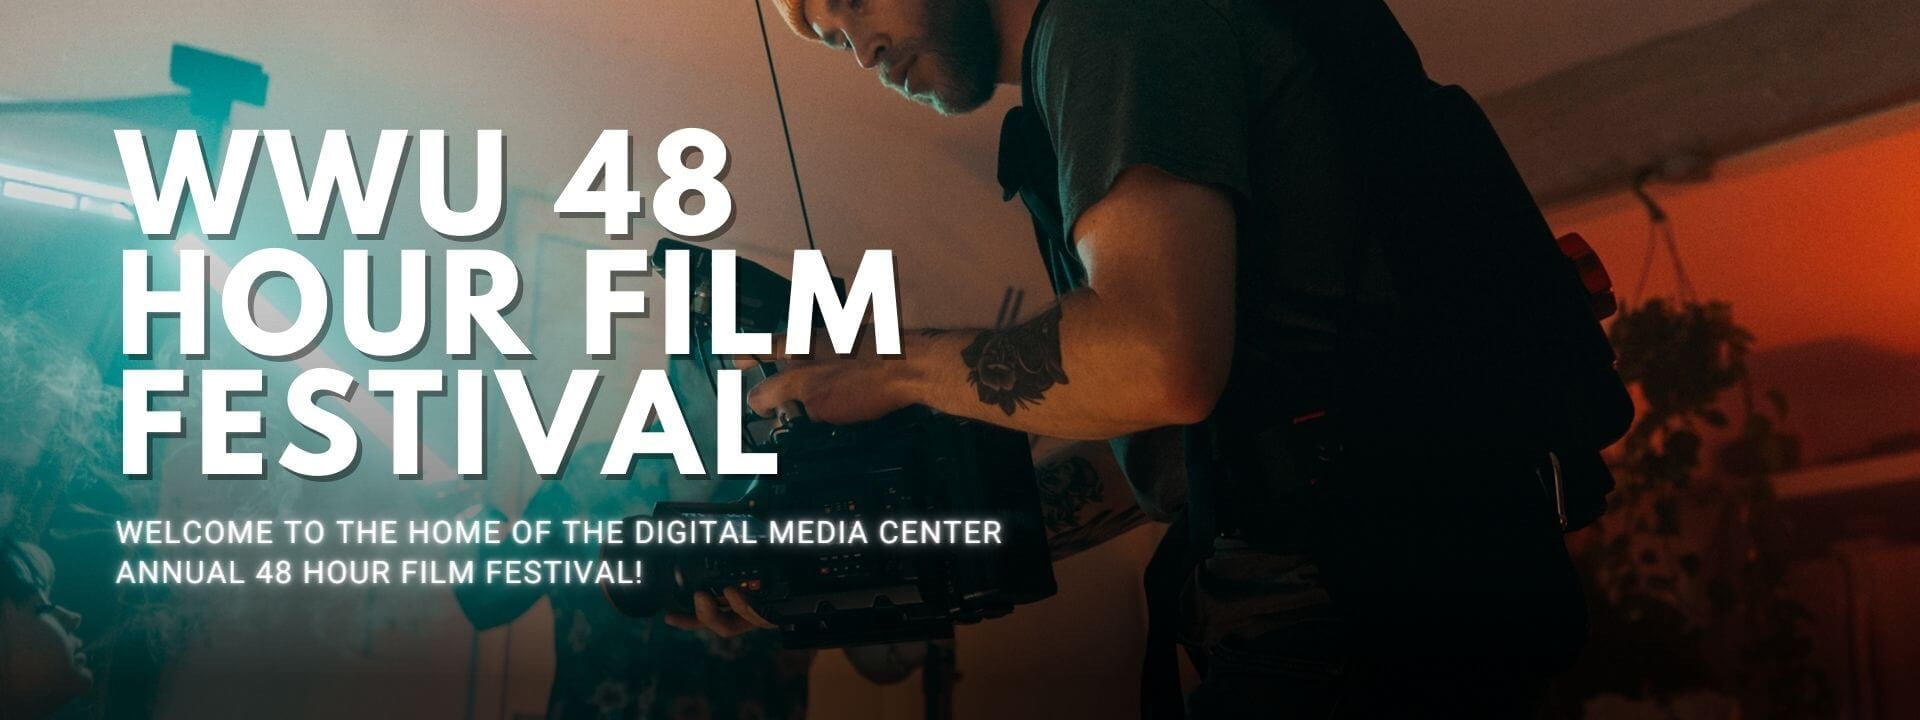 Welcome to the Home of the Digital Media Center 48 Hour film Festival